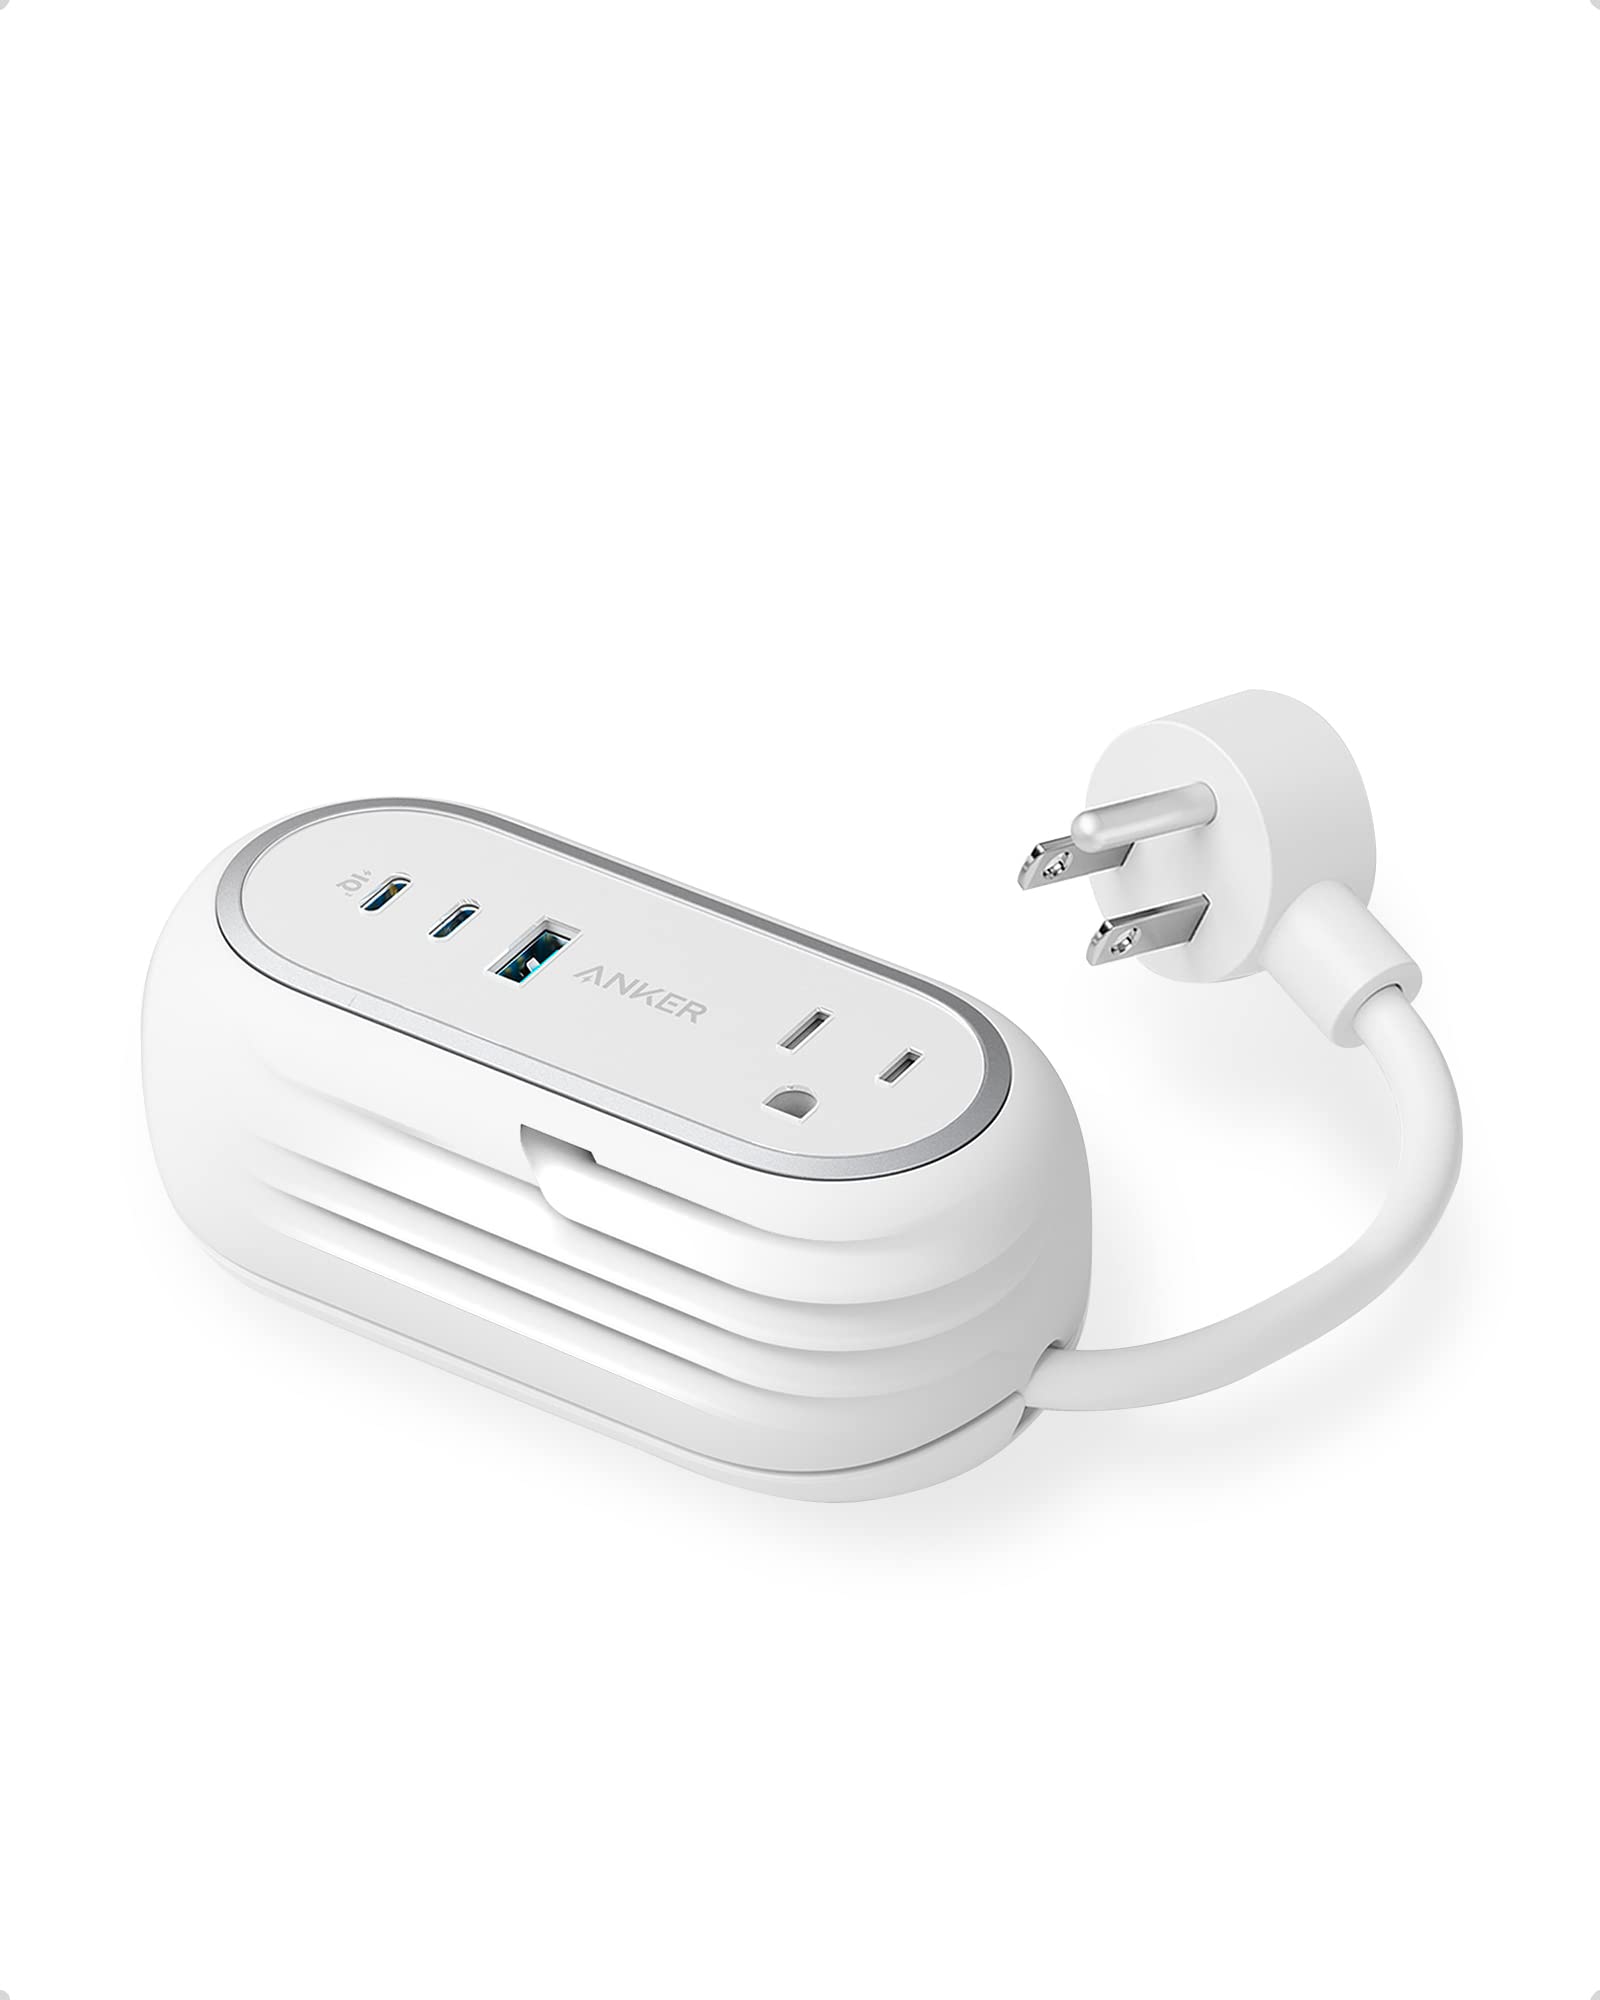 Anker 615 GanPrime 65W Charging Station w/ 3' Cord $36 + Free Shipping